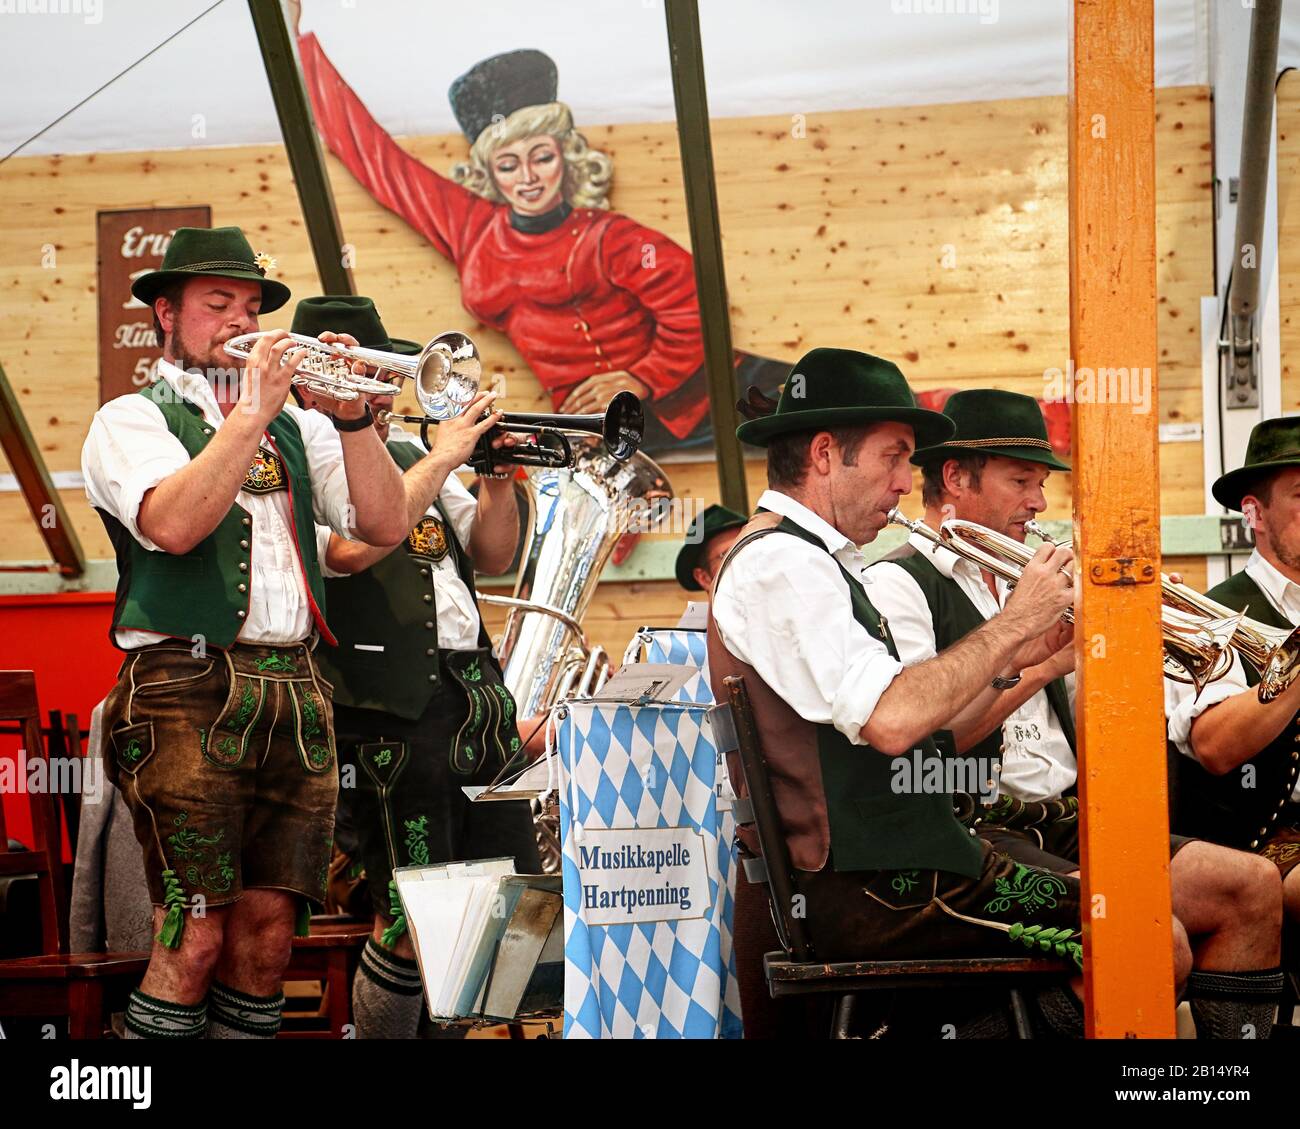 MUNICH, GERMANY - OCTOBER 1, 2019 Brass band playing traditional music in Bavarian costume in a beer tent of Oide Wiesn historical part of the Oktober Stock Photo